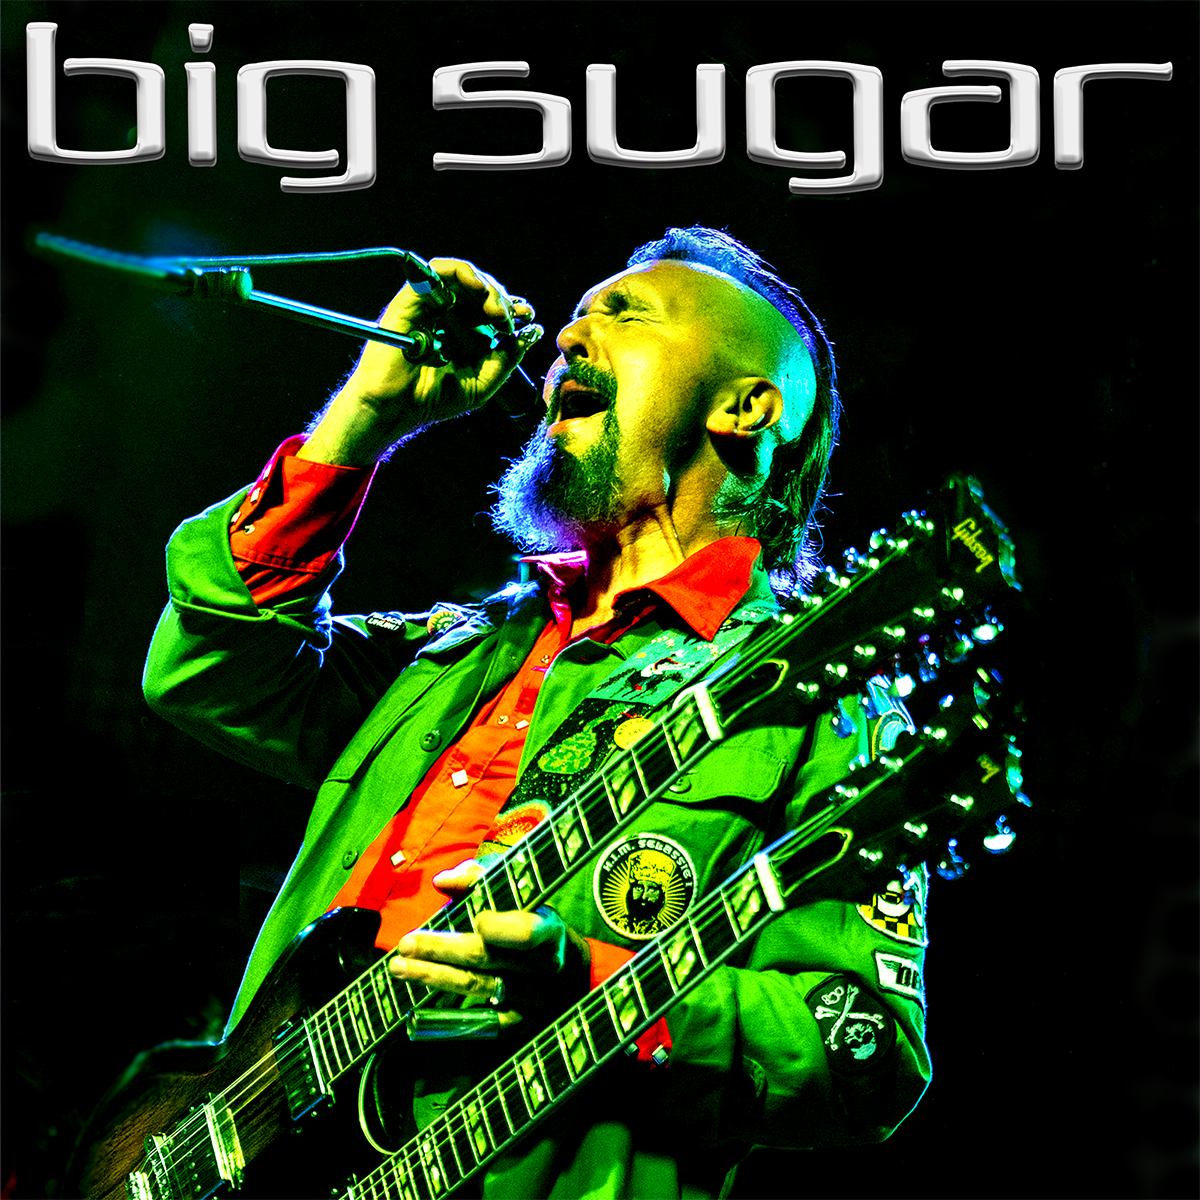 Big Sugar Announce Heated 25th Anniversary Deluxe Edition Set to Release October 14